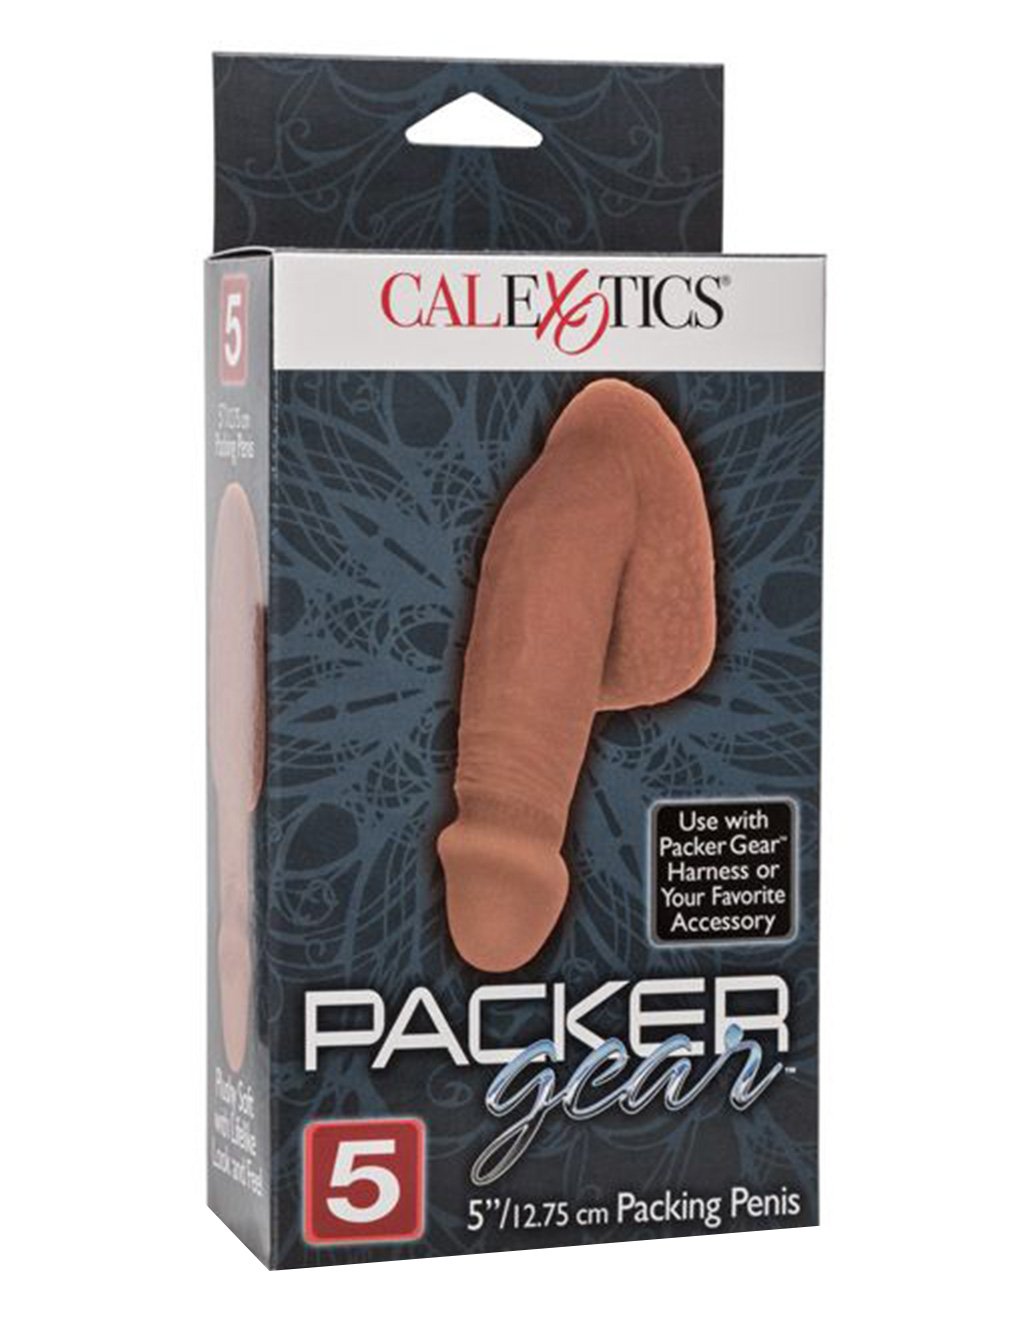 Packer Gear 5 Inch Packing Penis- Brown- Front box